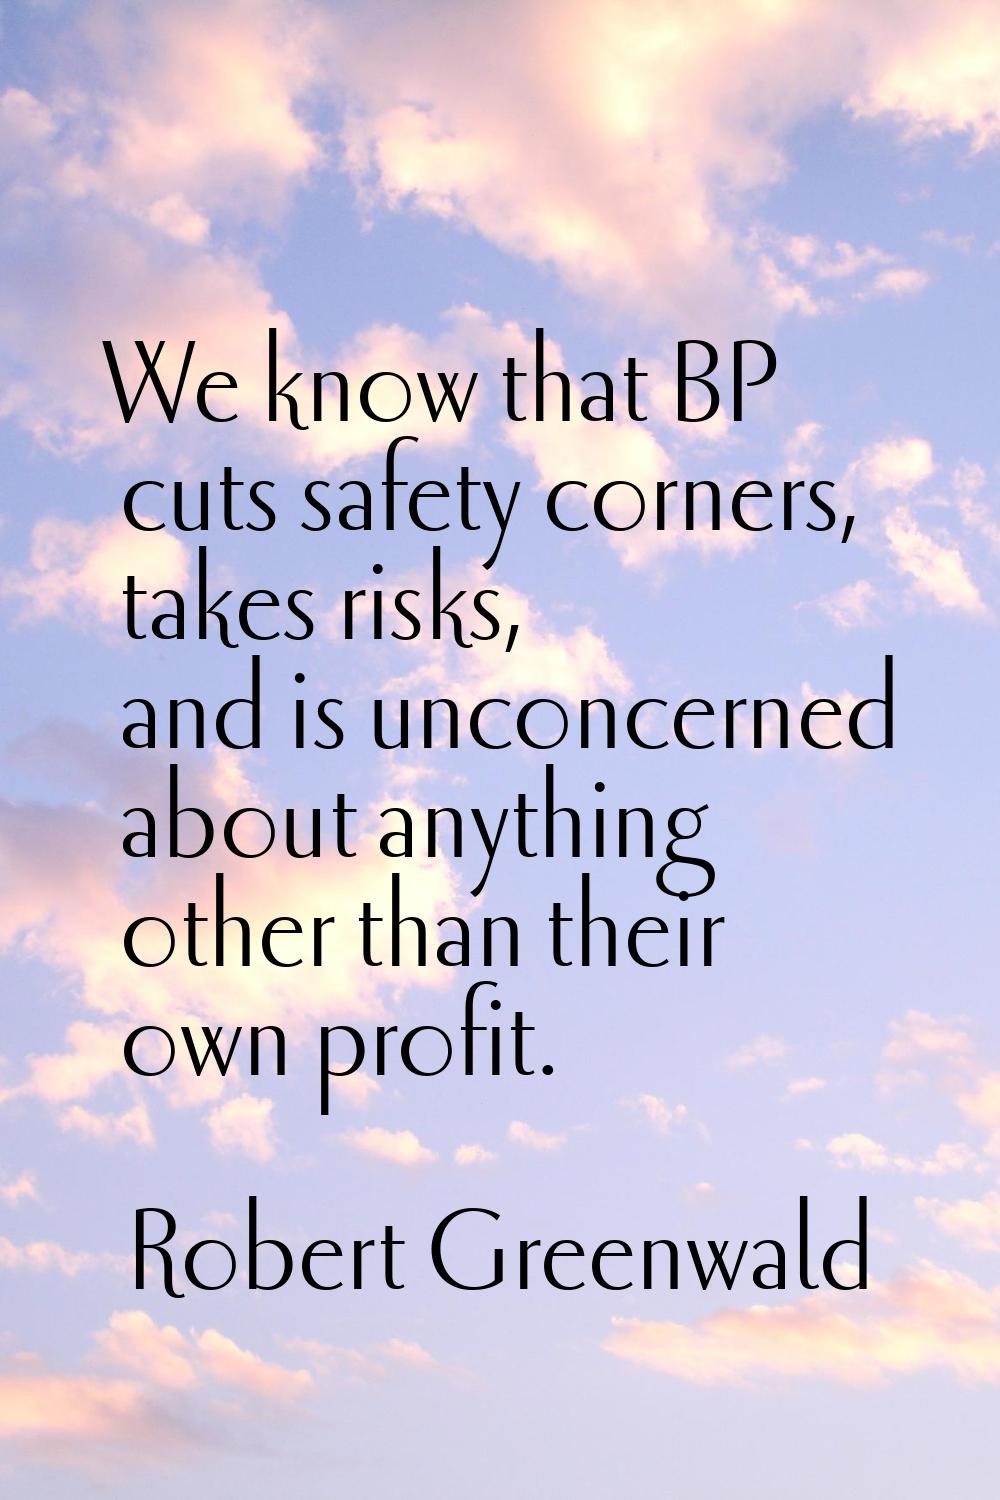 We know that BP cuts safety corners, takes risks, and is unconcerned about anything other than thei